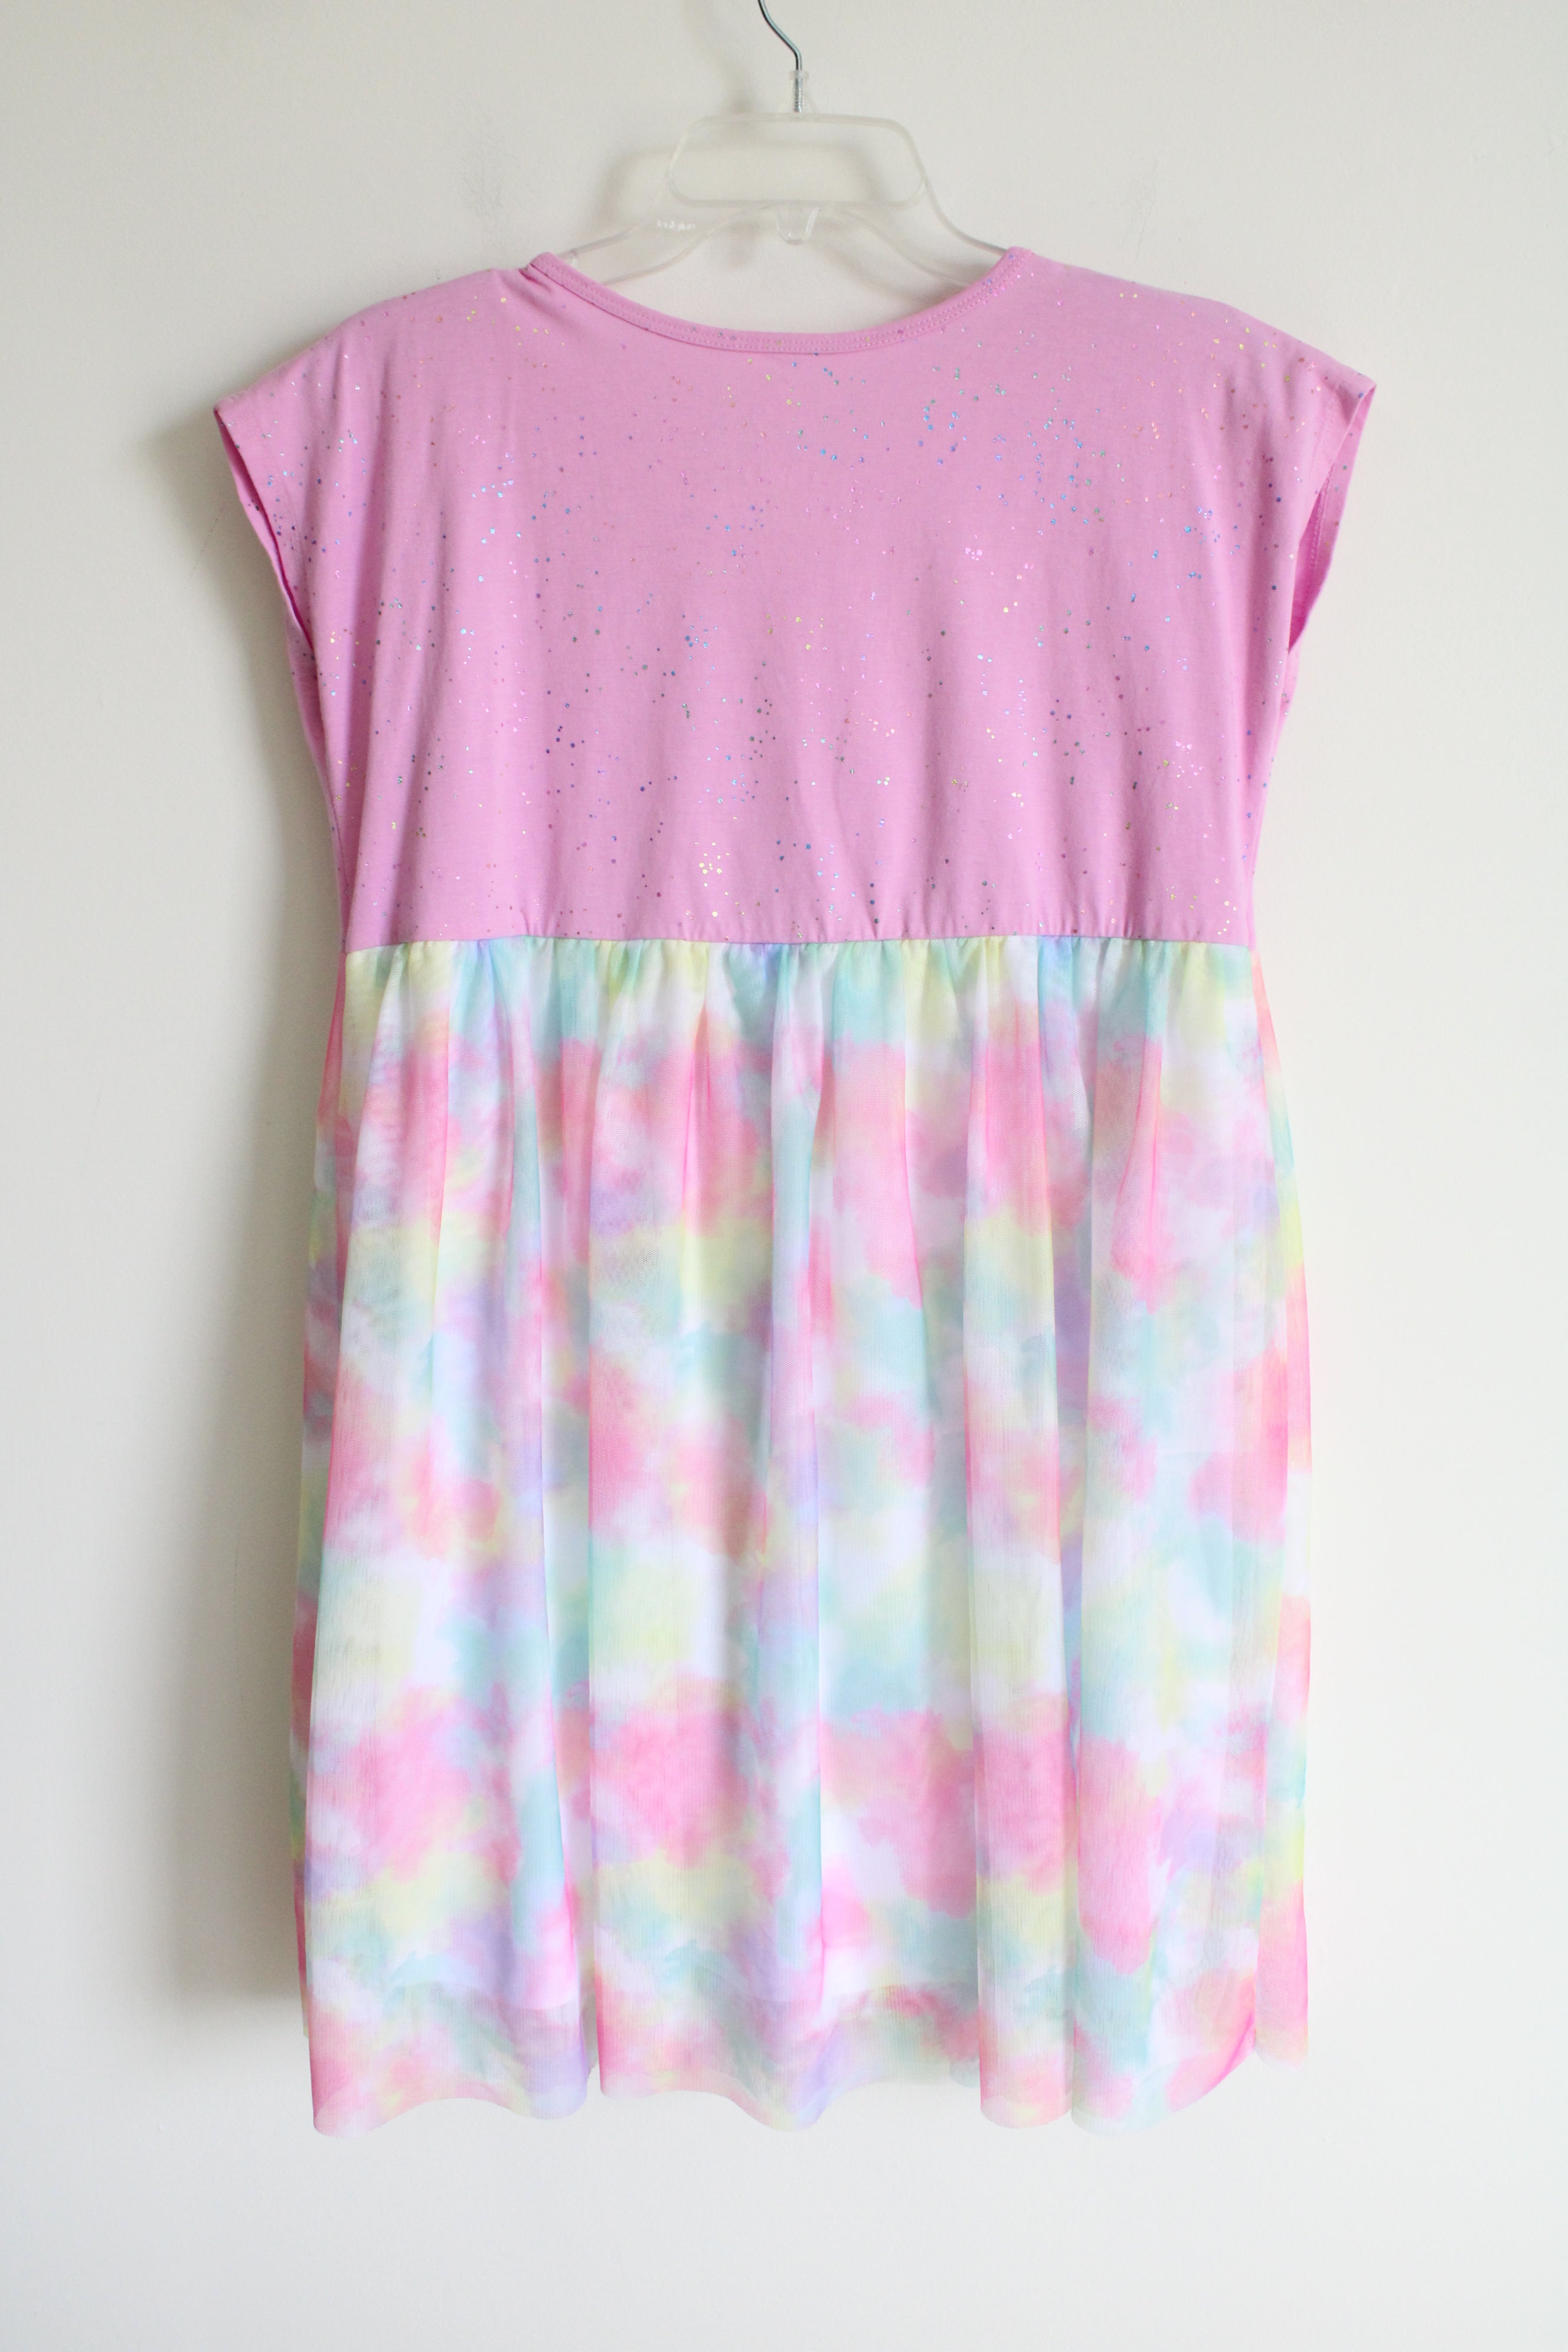 Wonder Nation Pink Tulle Dress | Youth XL (14/16)